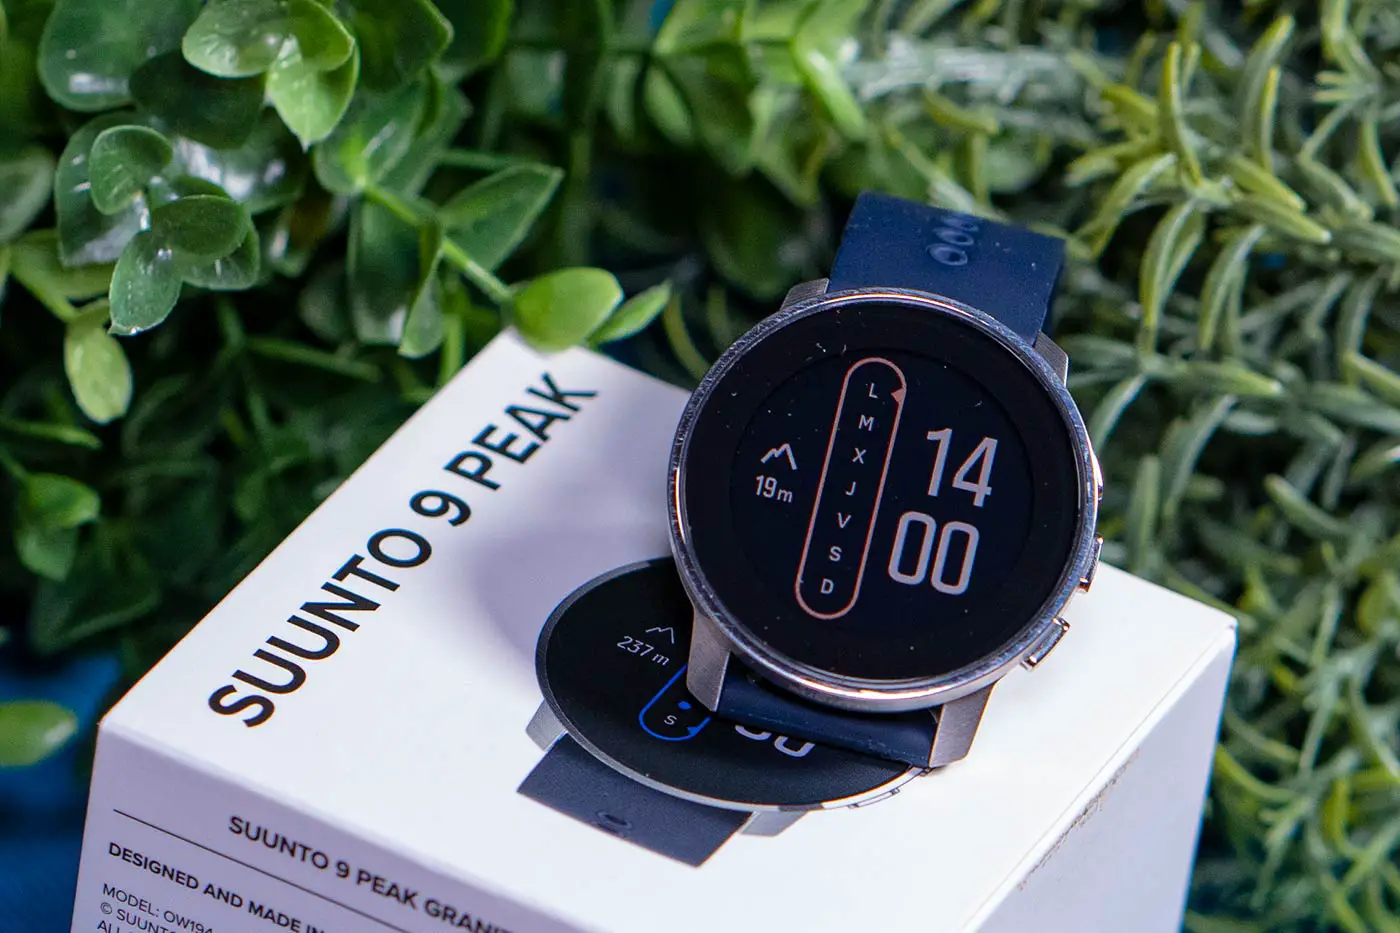 Suunto Peak | Review, features and operation